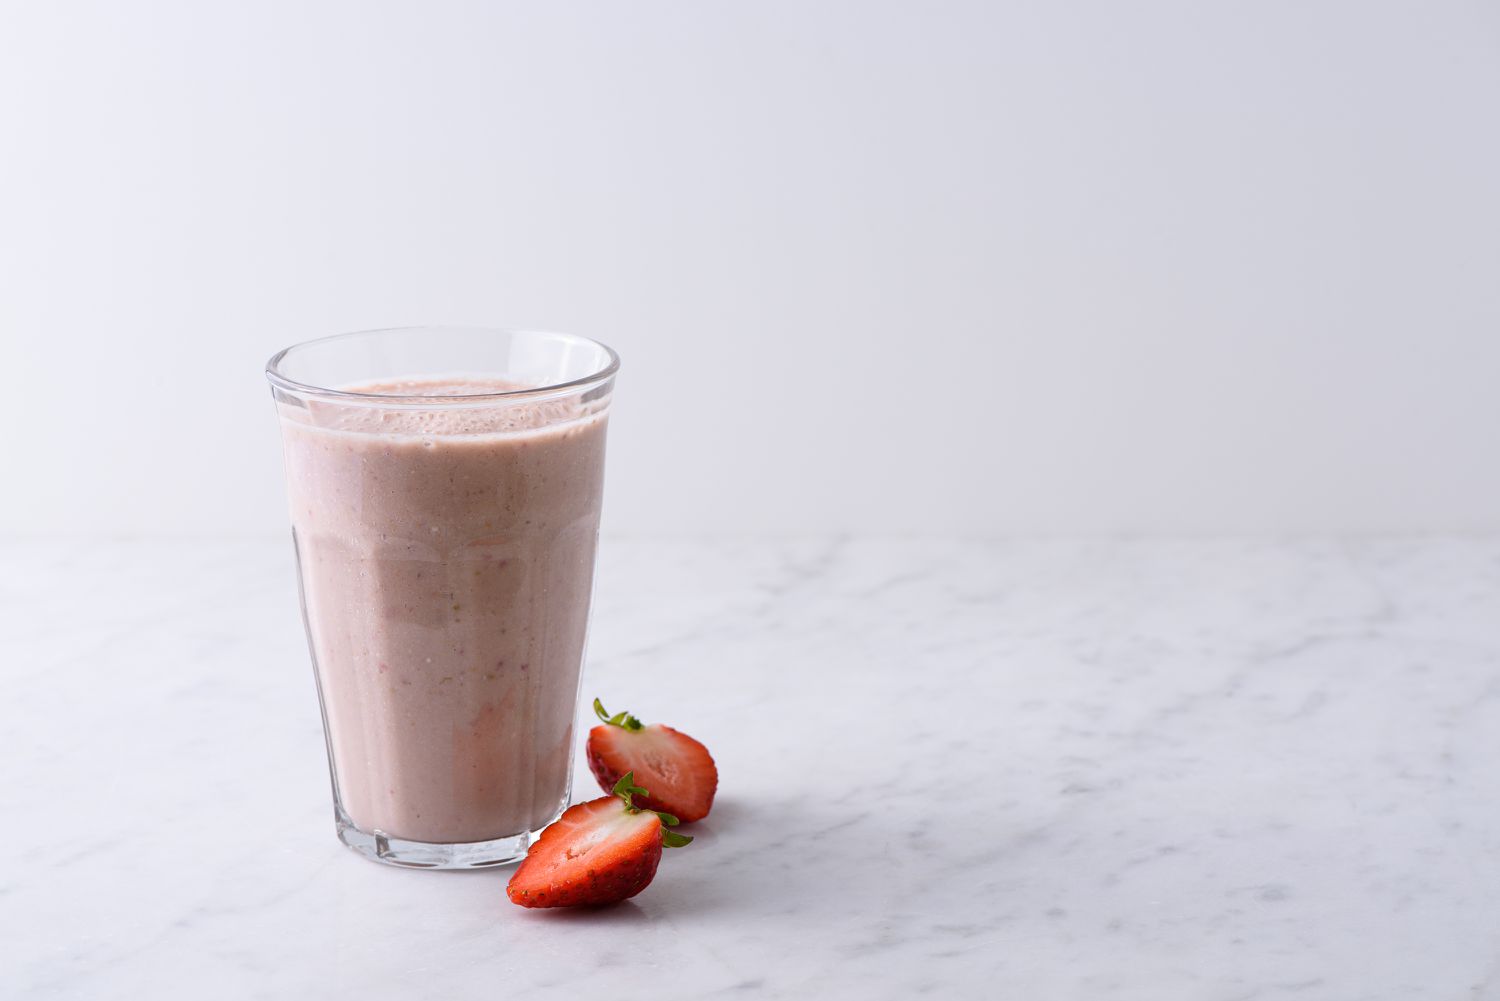 Strawberry protein and fruit breakfast smoothie